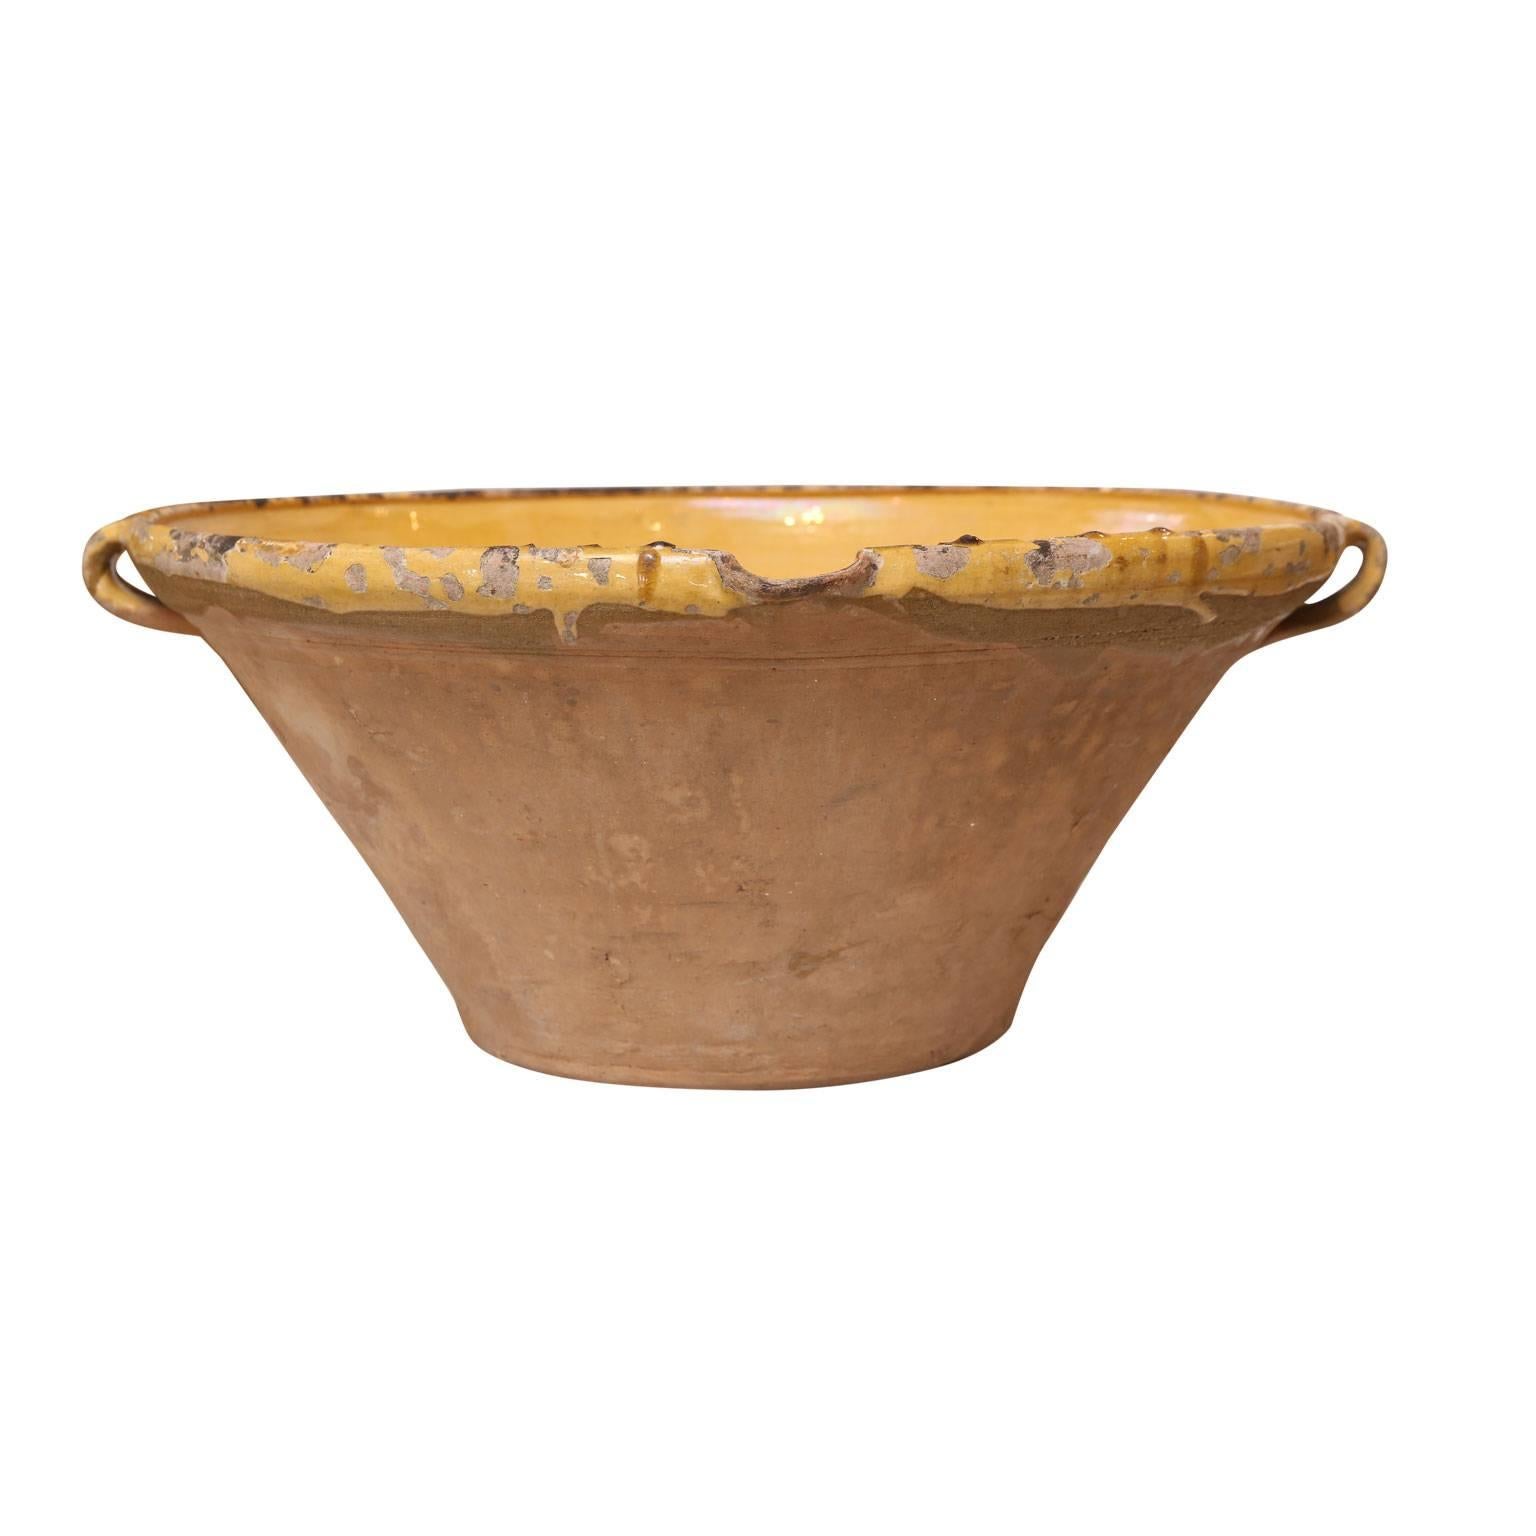 Large antique tian from Provence. This beautifully shaped larger-than-average earthenware bowl features small handles, tapered pour spout and subtle yellow glazed interior and rim. In the 19th century, this French bowl served a utilitarian purpose: